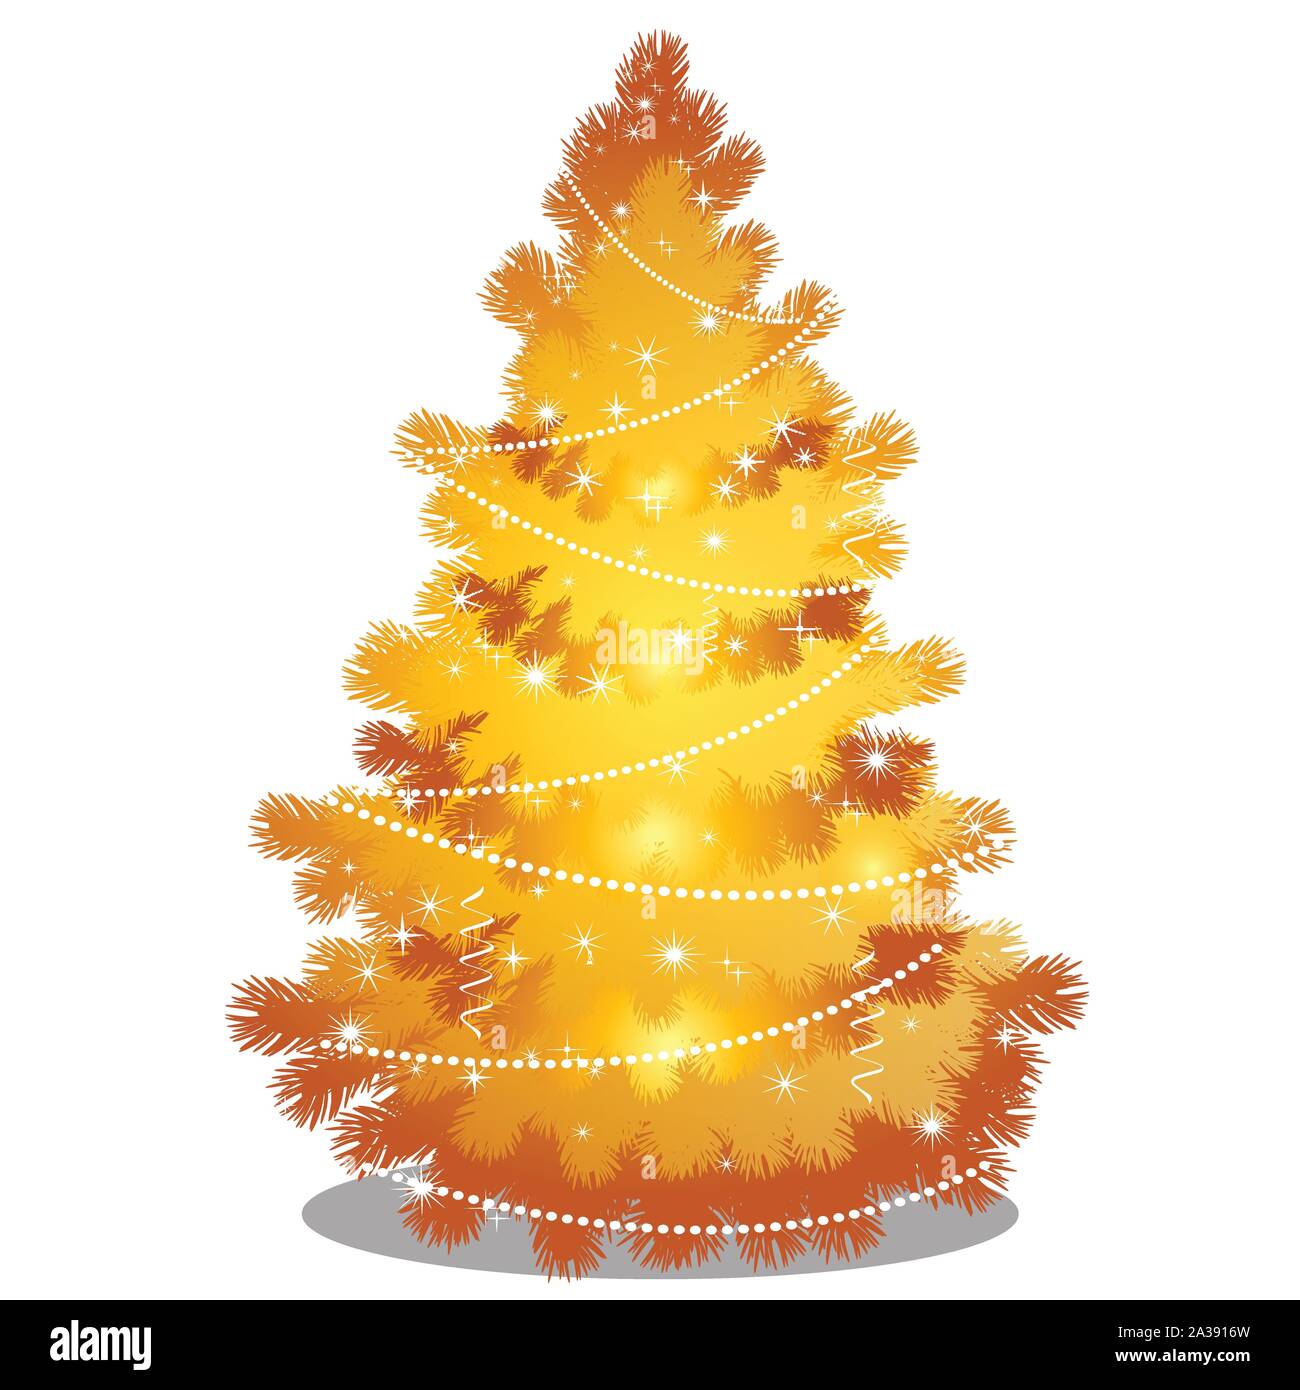 Golden Christmas tree with beads and sparkling flecks isolated on white background. Sketch of Christmas festive poster, party invitation, other Stock Vector